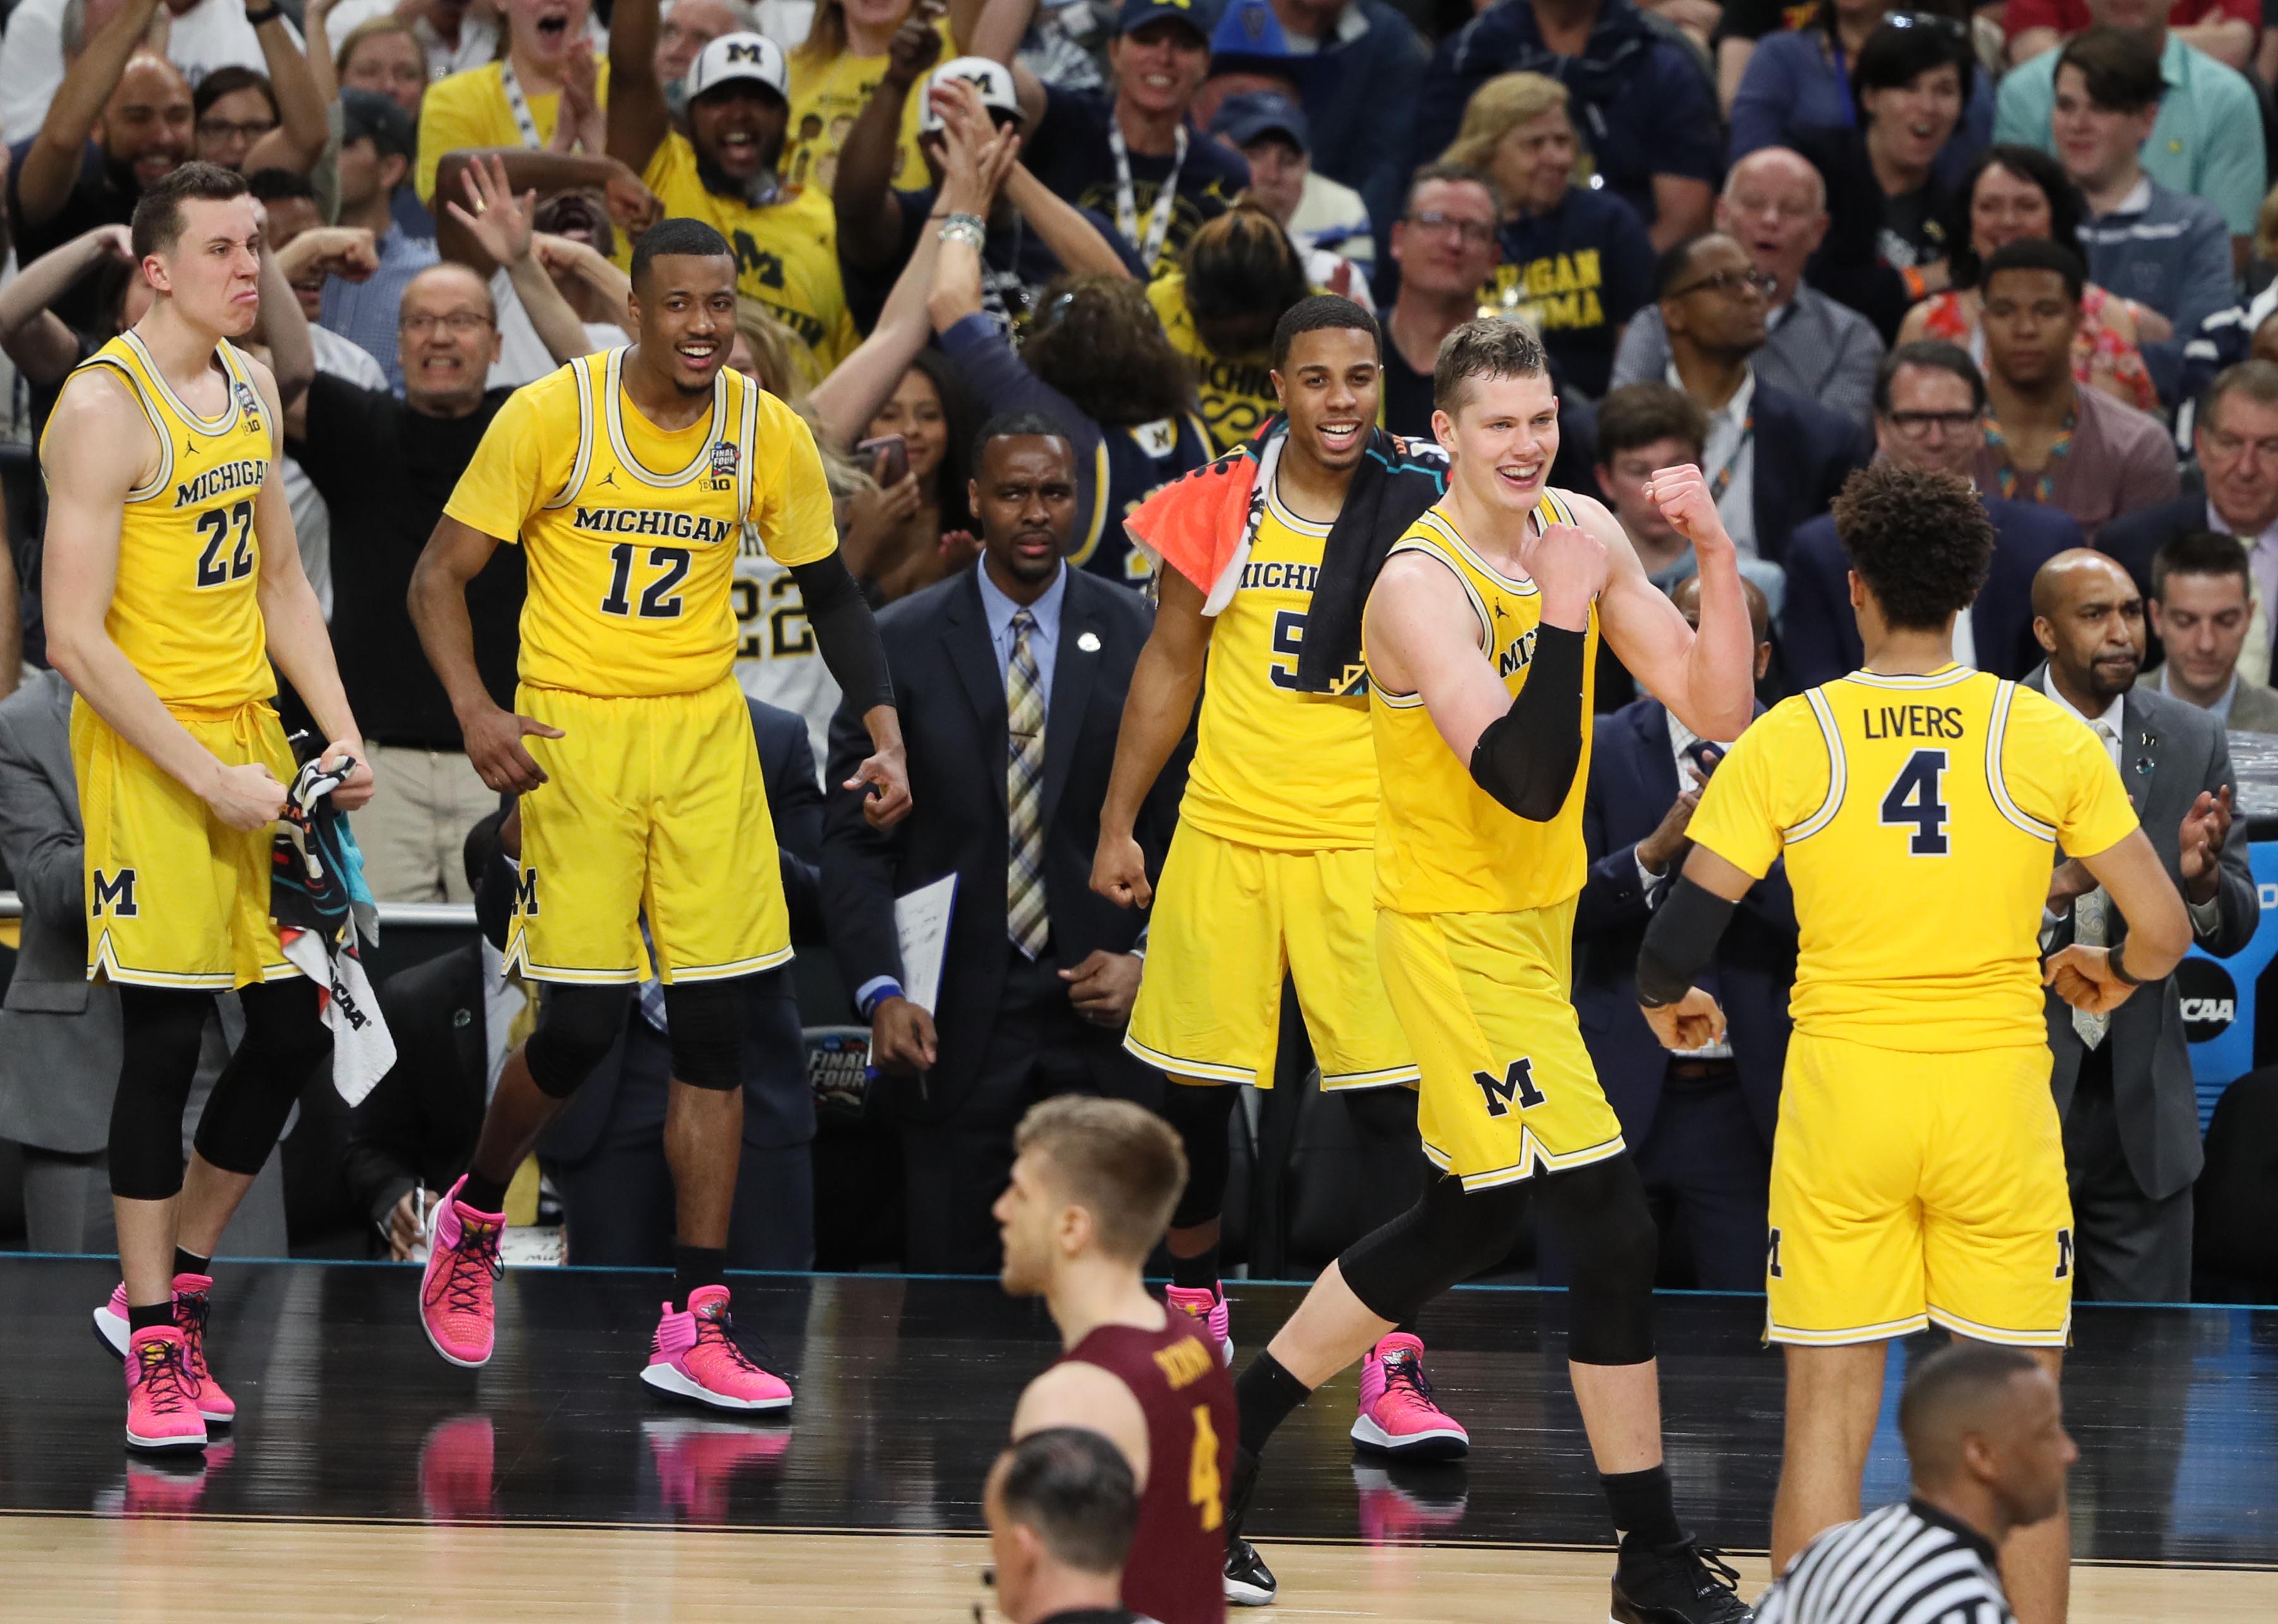 Michigan Wolverines forward Moritz Wagner (13) celebrates with teammates after scoring a basket in the second half against the Loyola Ramblers in a Final Four game at the Alamodome.